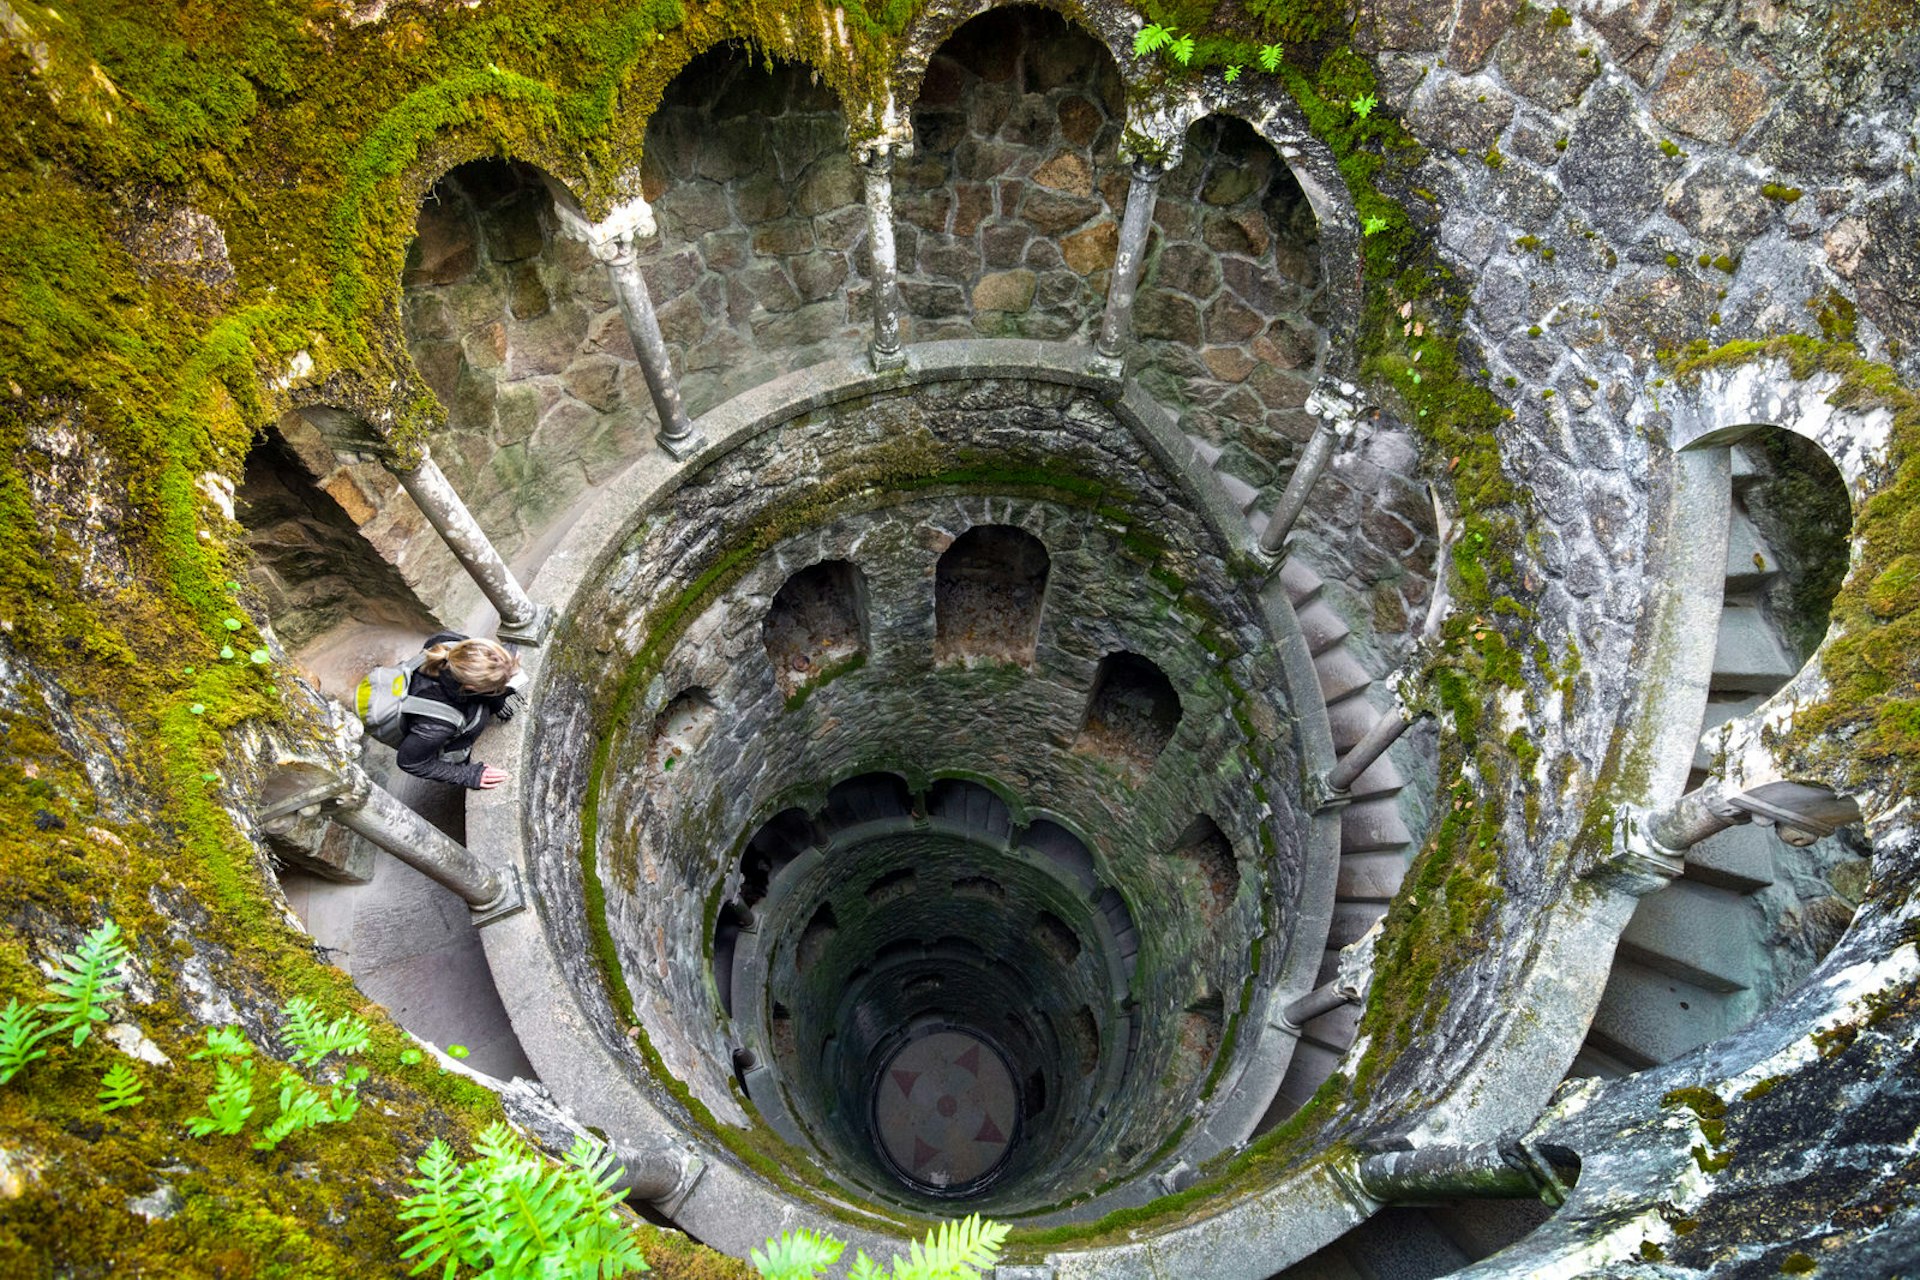 The wells of Quinta da Regaleira, Sintra, Portugal © Marko Stavric / Getty Images